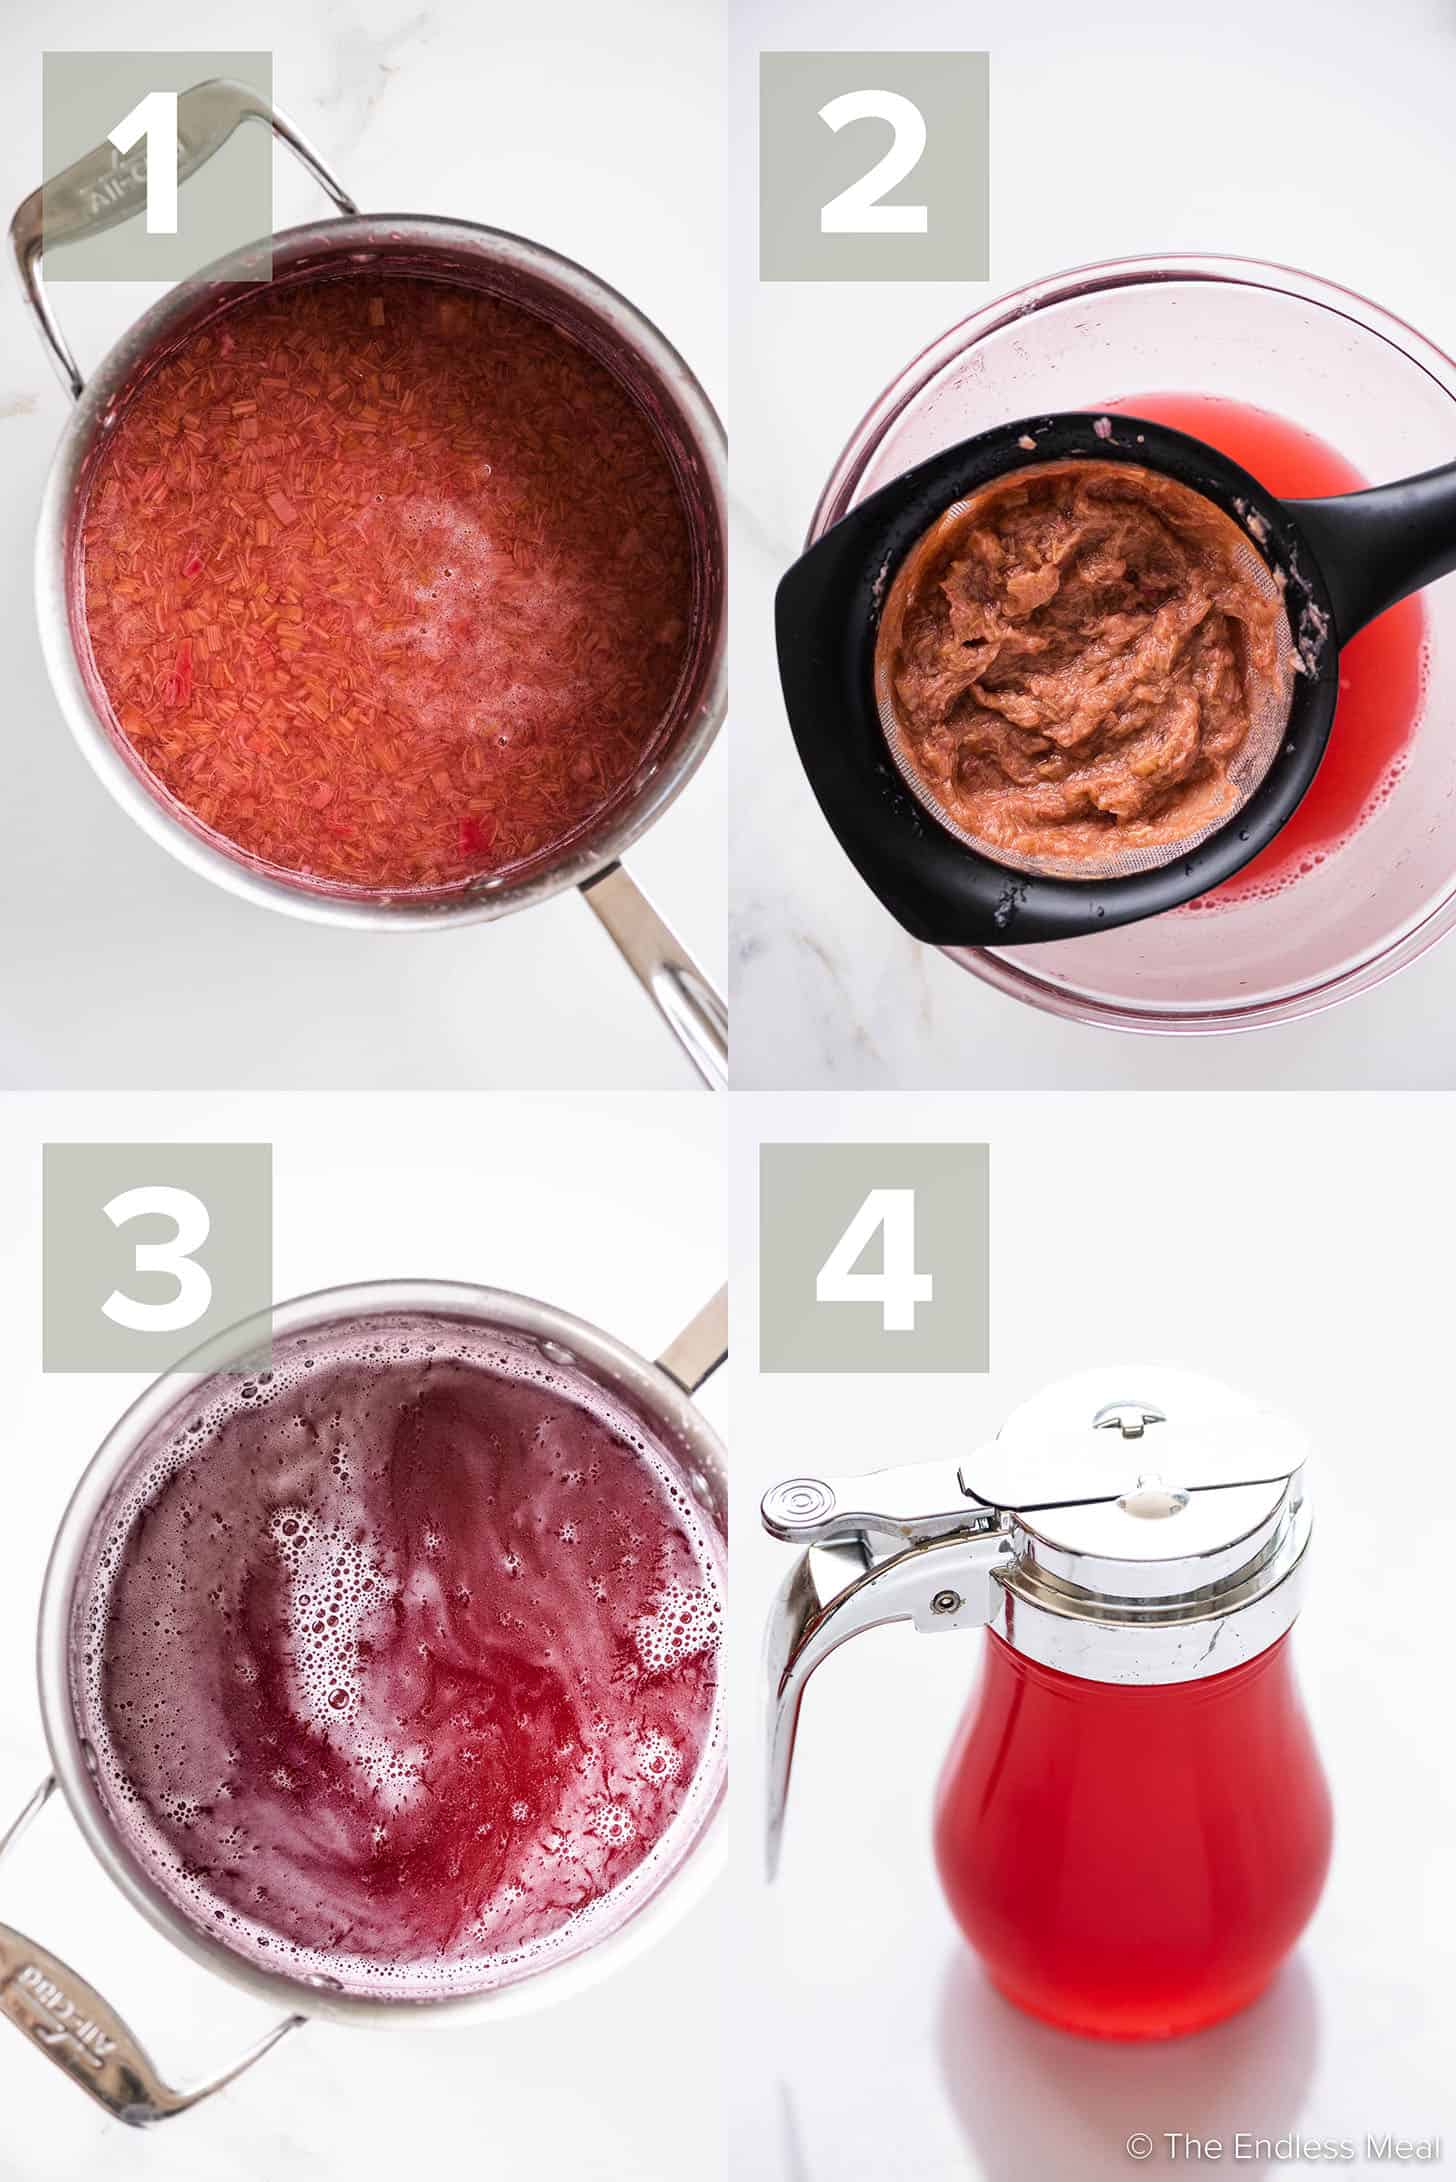 4 pictures showing how to make Rhubarb Syrup